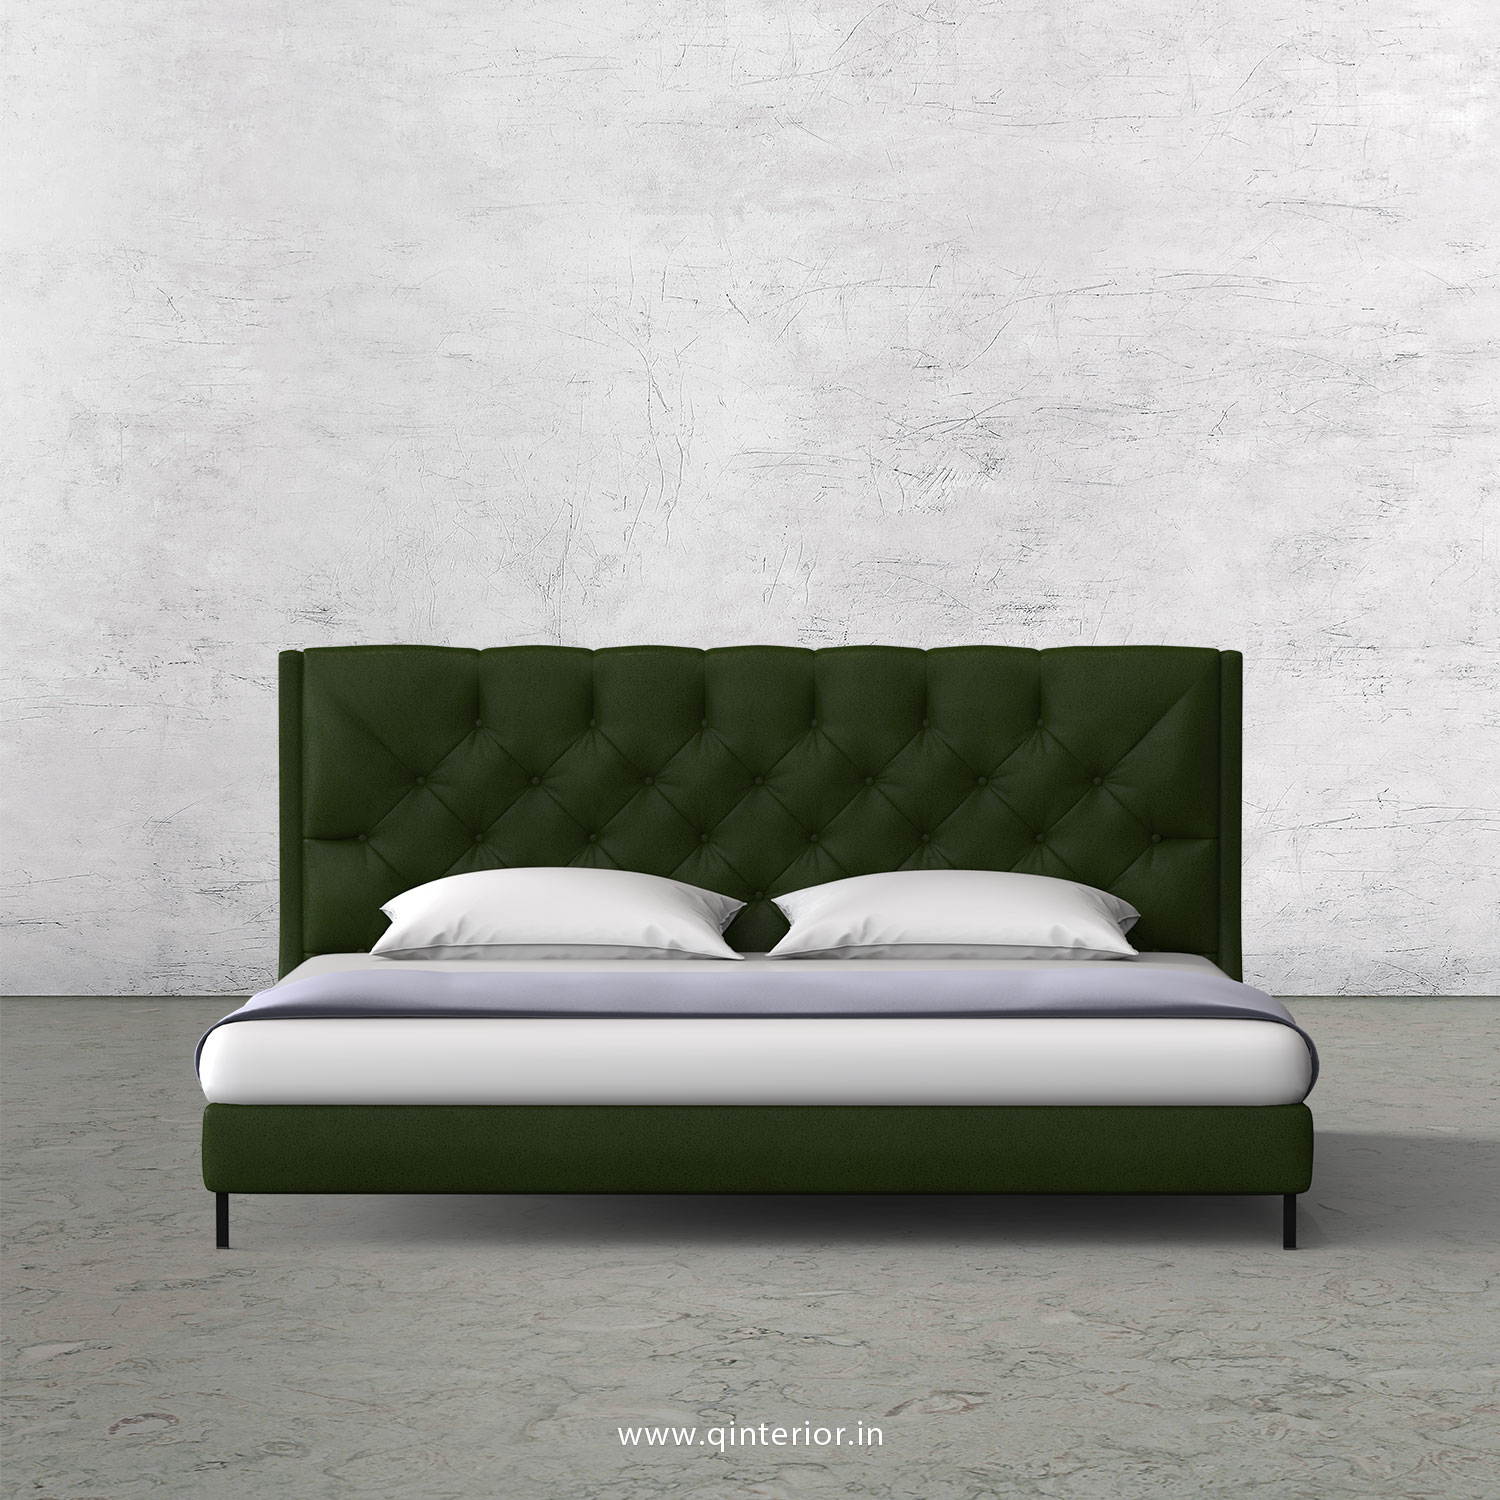 Scorpius King Size Bed in Fab Leather Fabric - KBD003 FL04